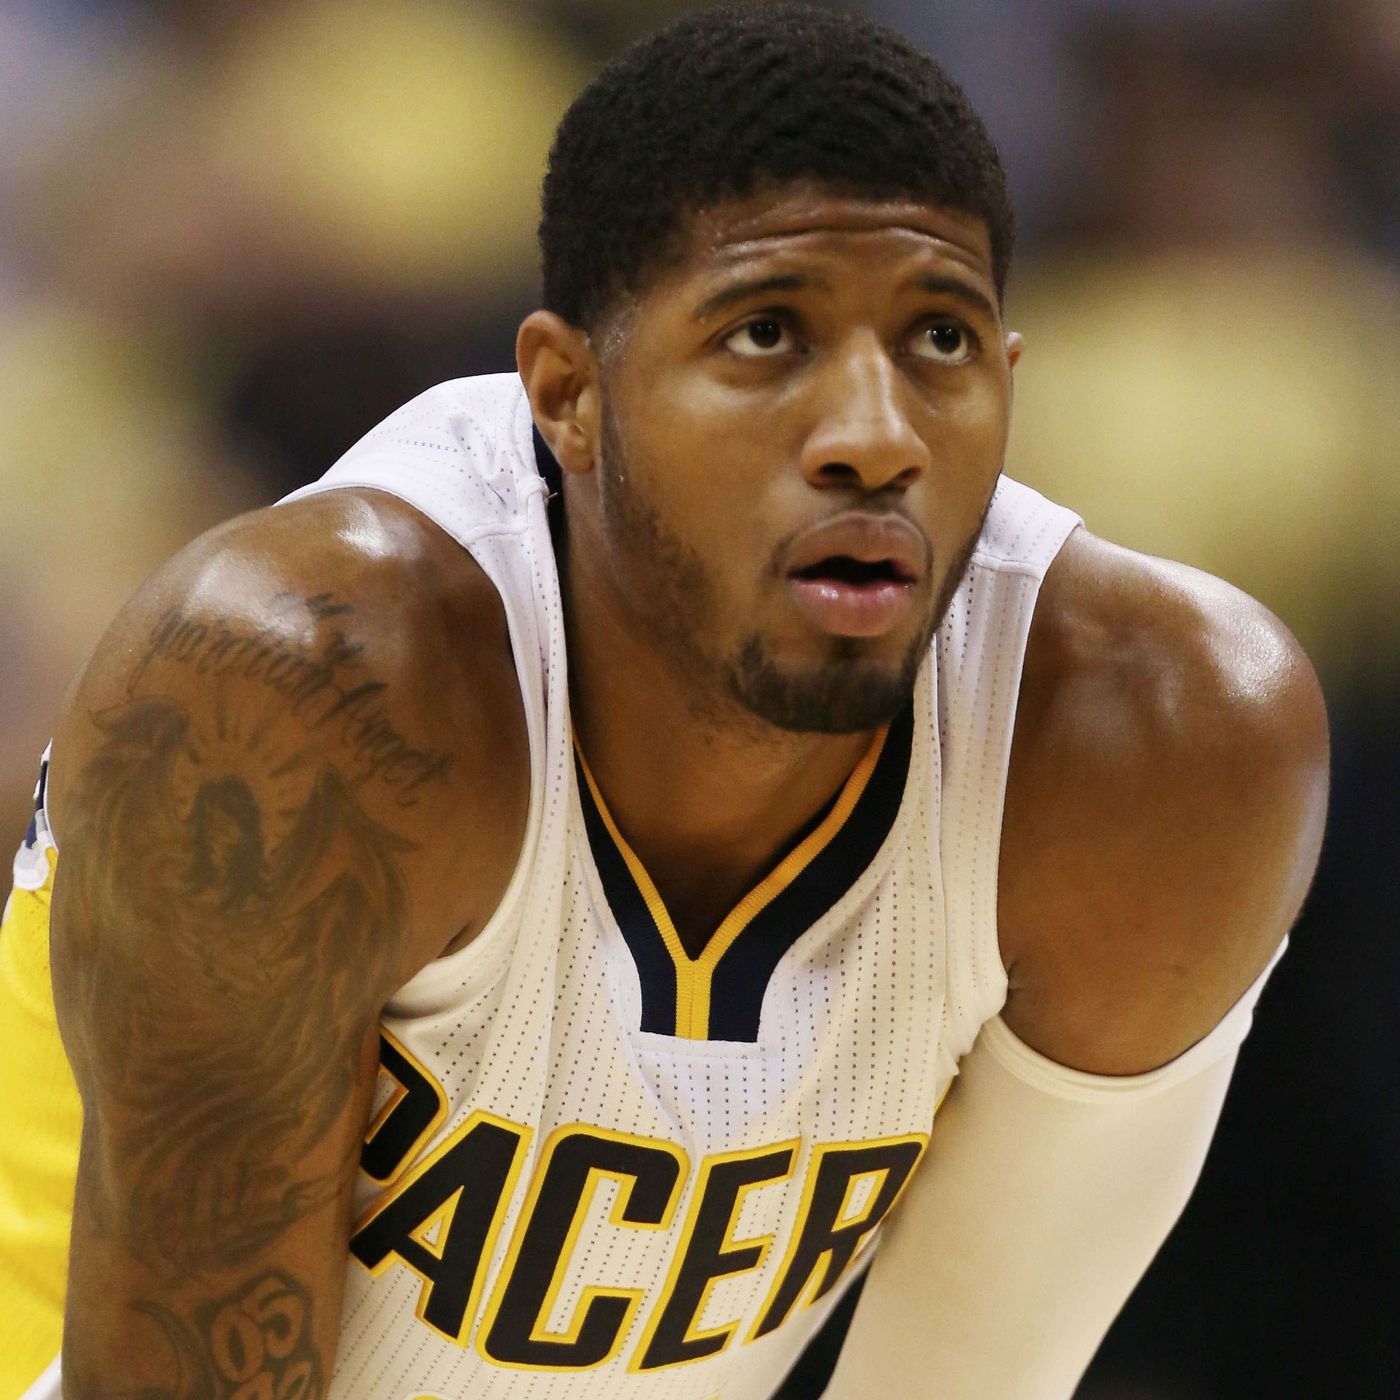 Paul George talks about his return to the Pacers